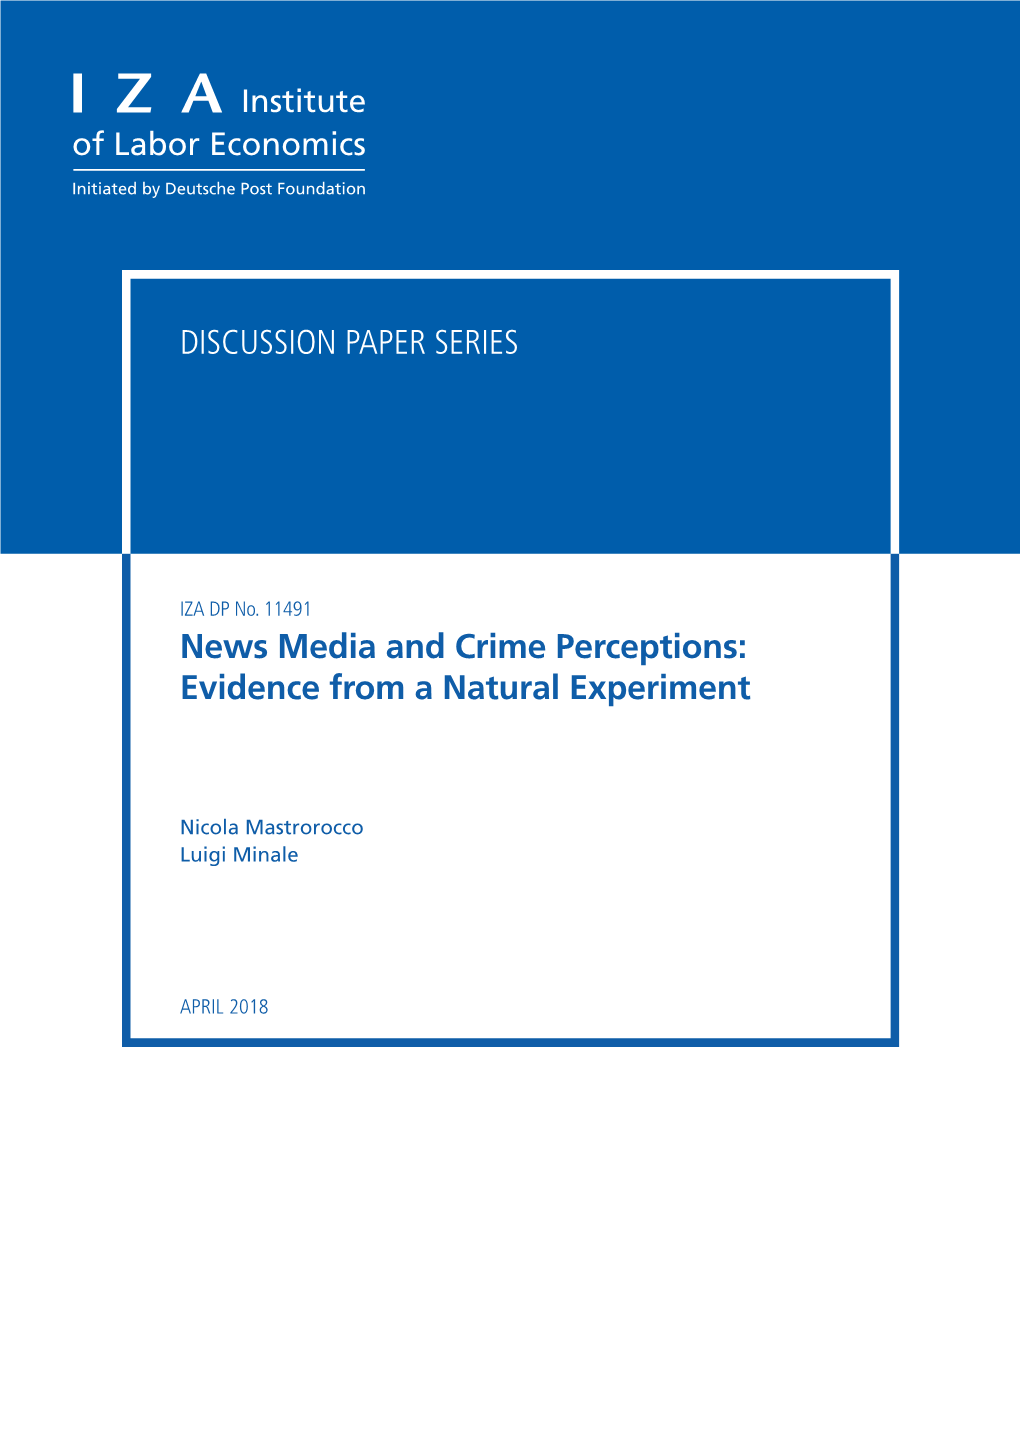 News Media and Crime Perceptions: Evidence from a Natural Experiment